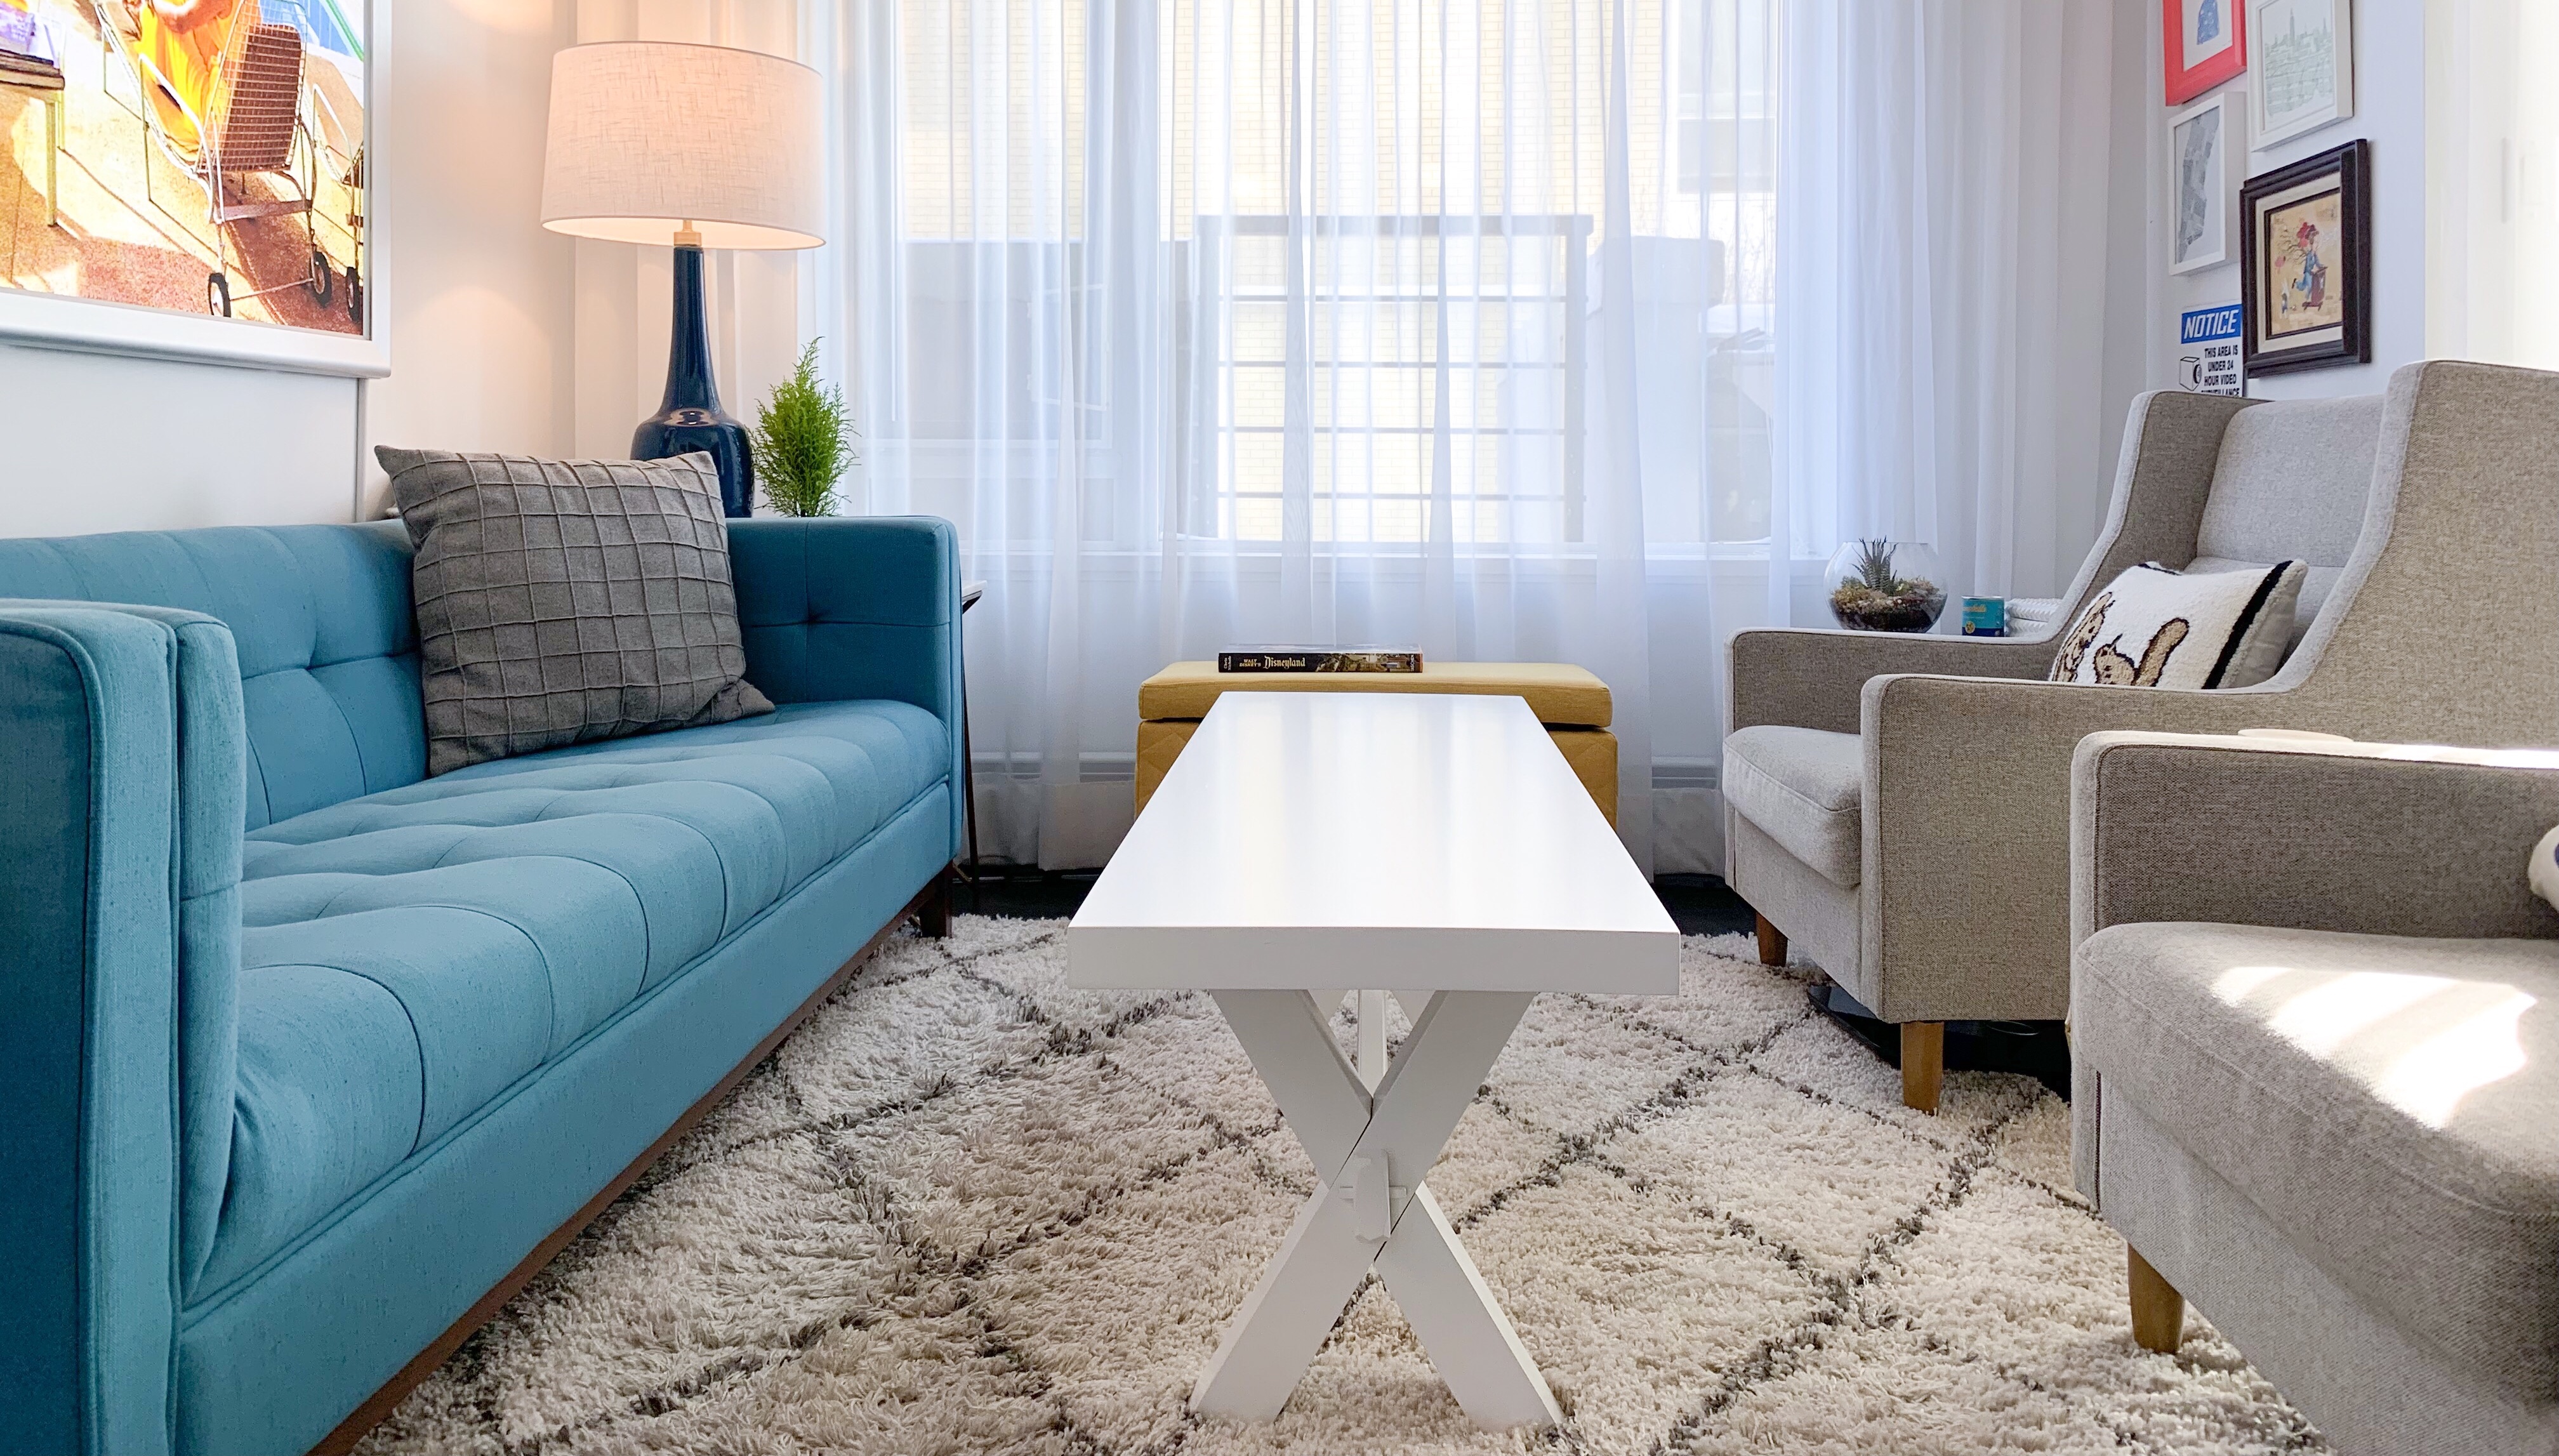 The Perfect Fit: Customizing Furniture For Your Space